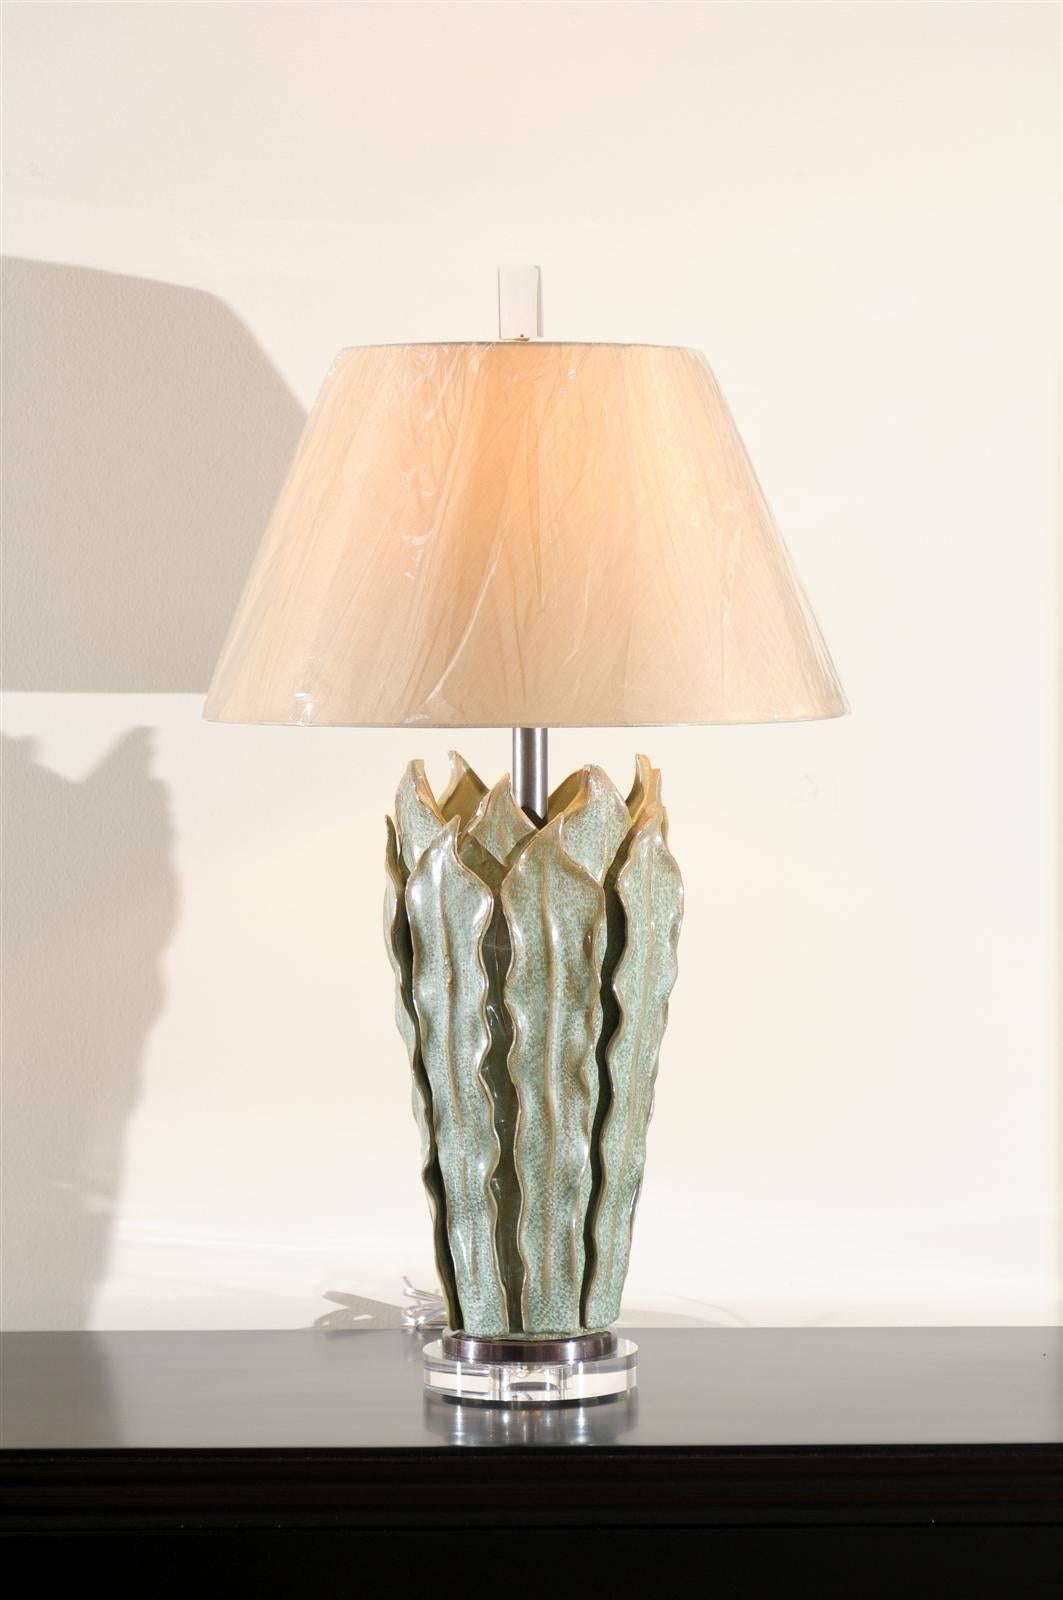 These magnificent lamps are shipped as photographed and described in the narrative. They are custom built using materials of the highest quality and are shipped complete with the new shades, harps and finials shown in the photos.

A fabulous pair of